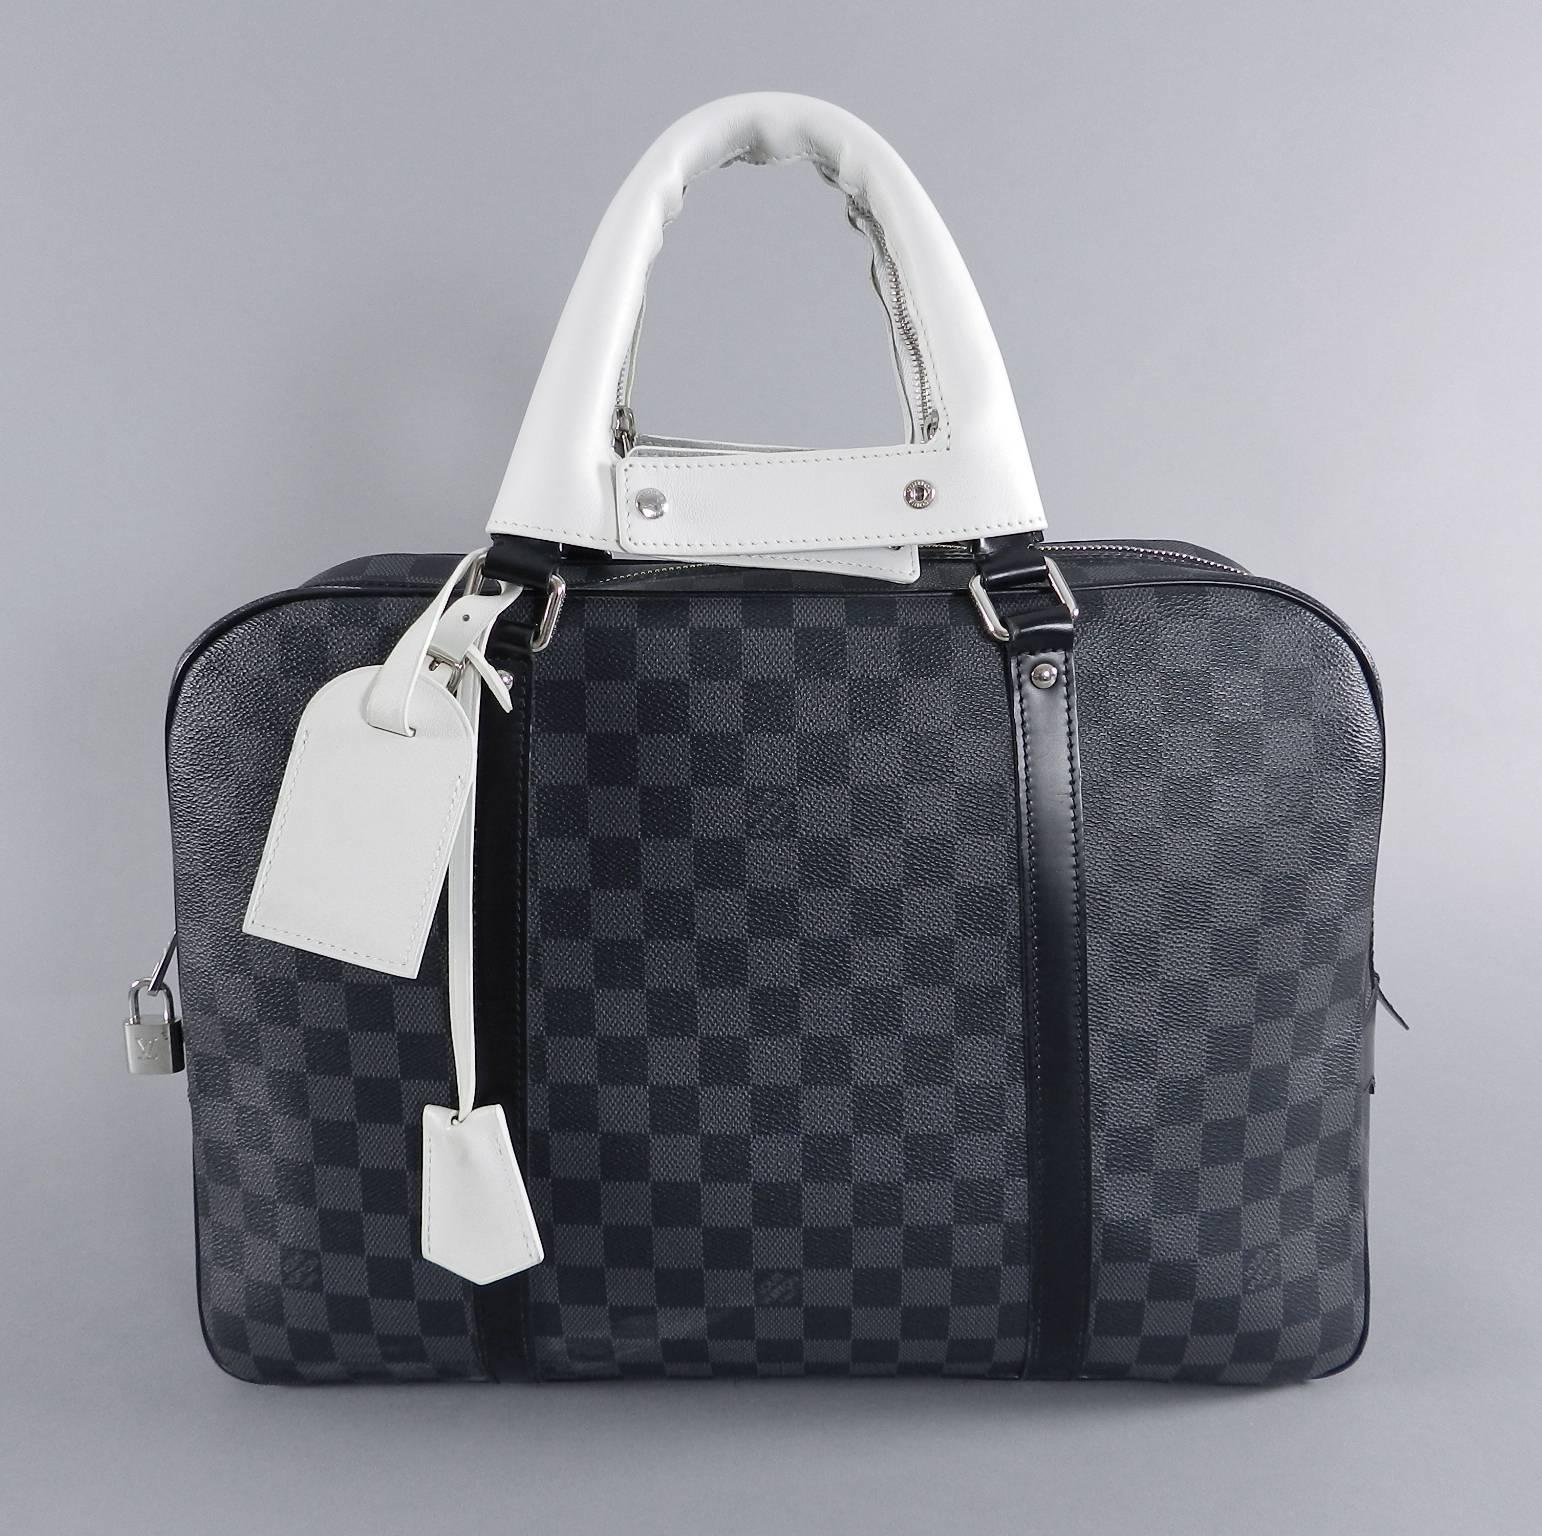 Louis vuitton porte documents voyage travel bag. Dark grey and black daimer graphite canvas. Limited edition with white zip off handle covers, clochette, and ID tag. ID tag is monogramed with previous owner's initials. Comes with lock and 2 keys.